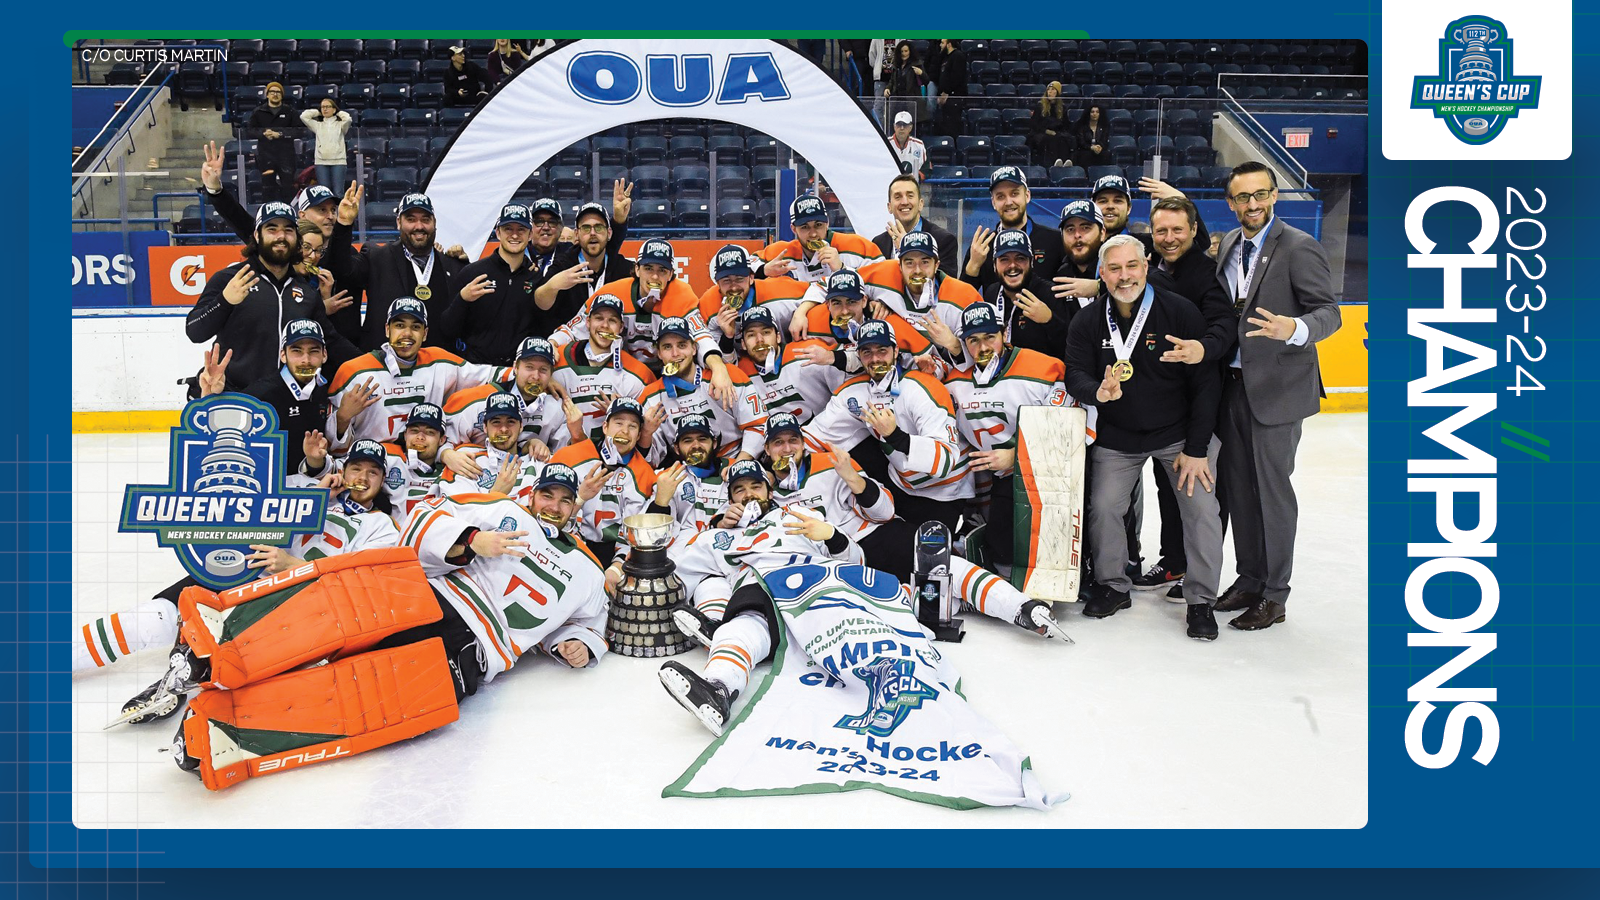 Predominantly blue graphic covered mostly by 2023-24 OUA Men's Hockey Championship banner photo, with the corresponding championship logo and white text reading '2023-24 Champions' on the right side